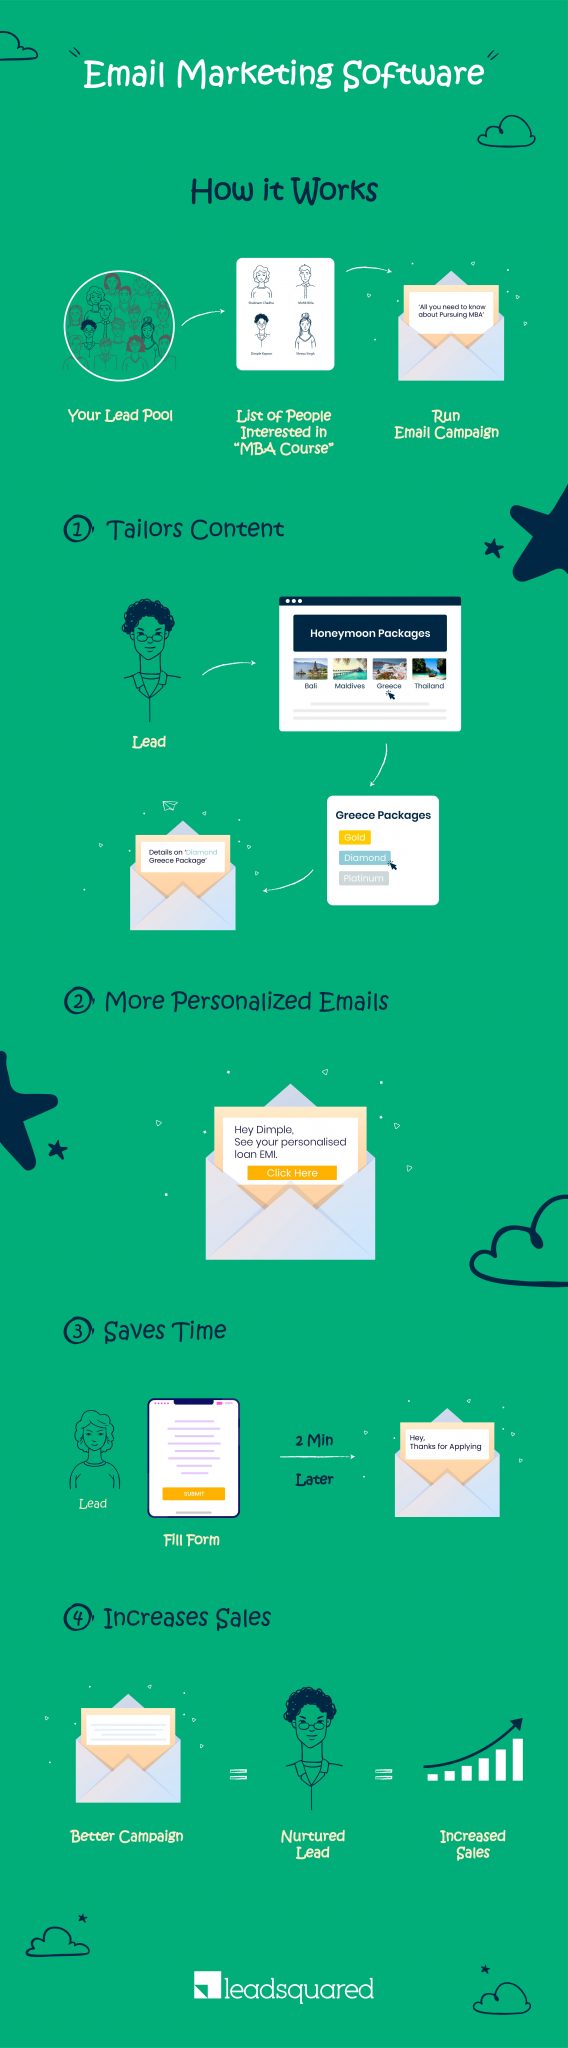 email marketing software - infographic